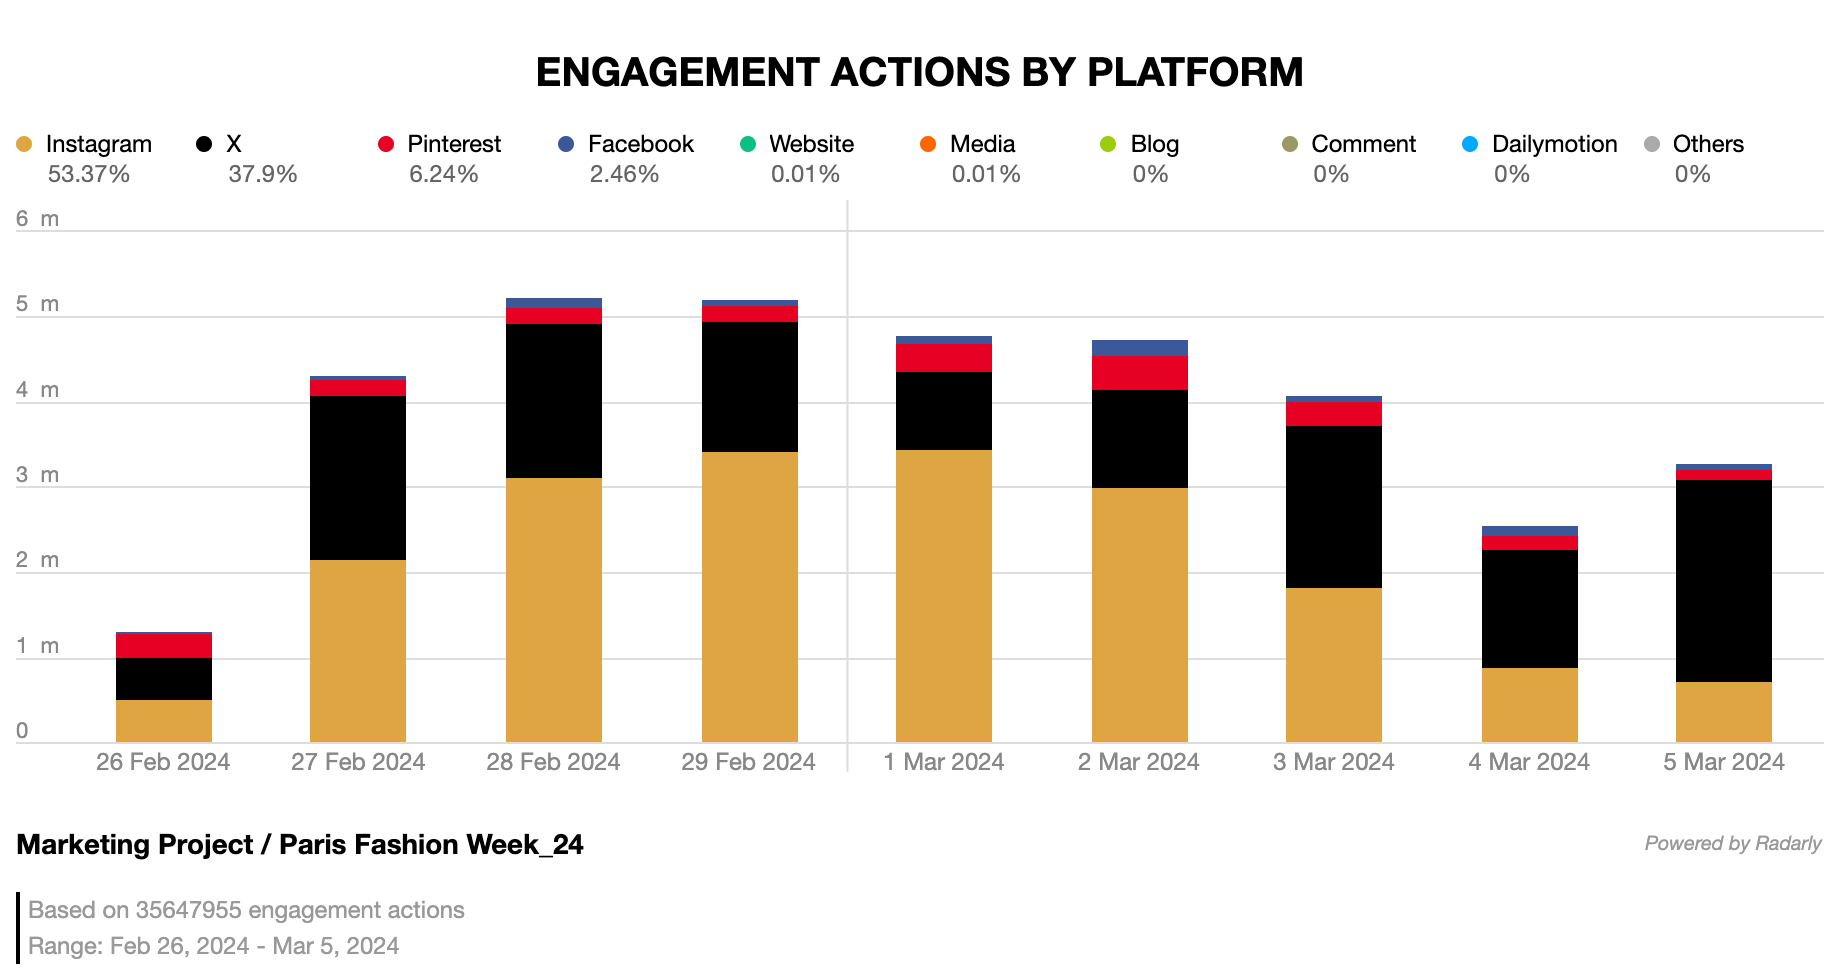 A bar chart showing engagement actions by platform over time.